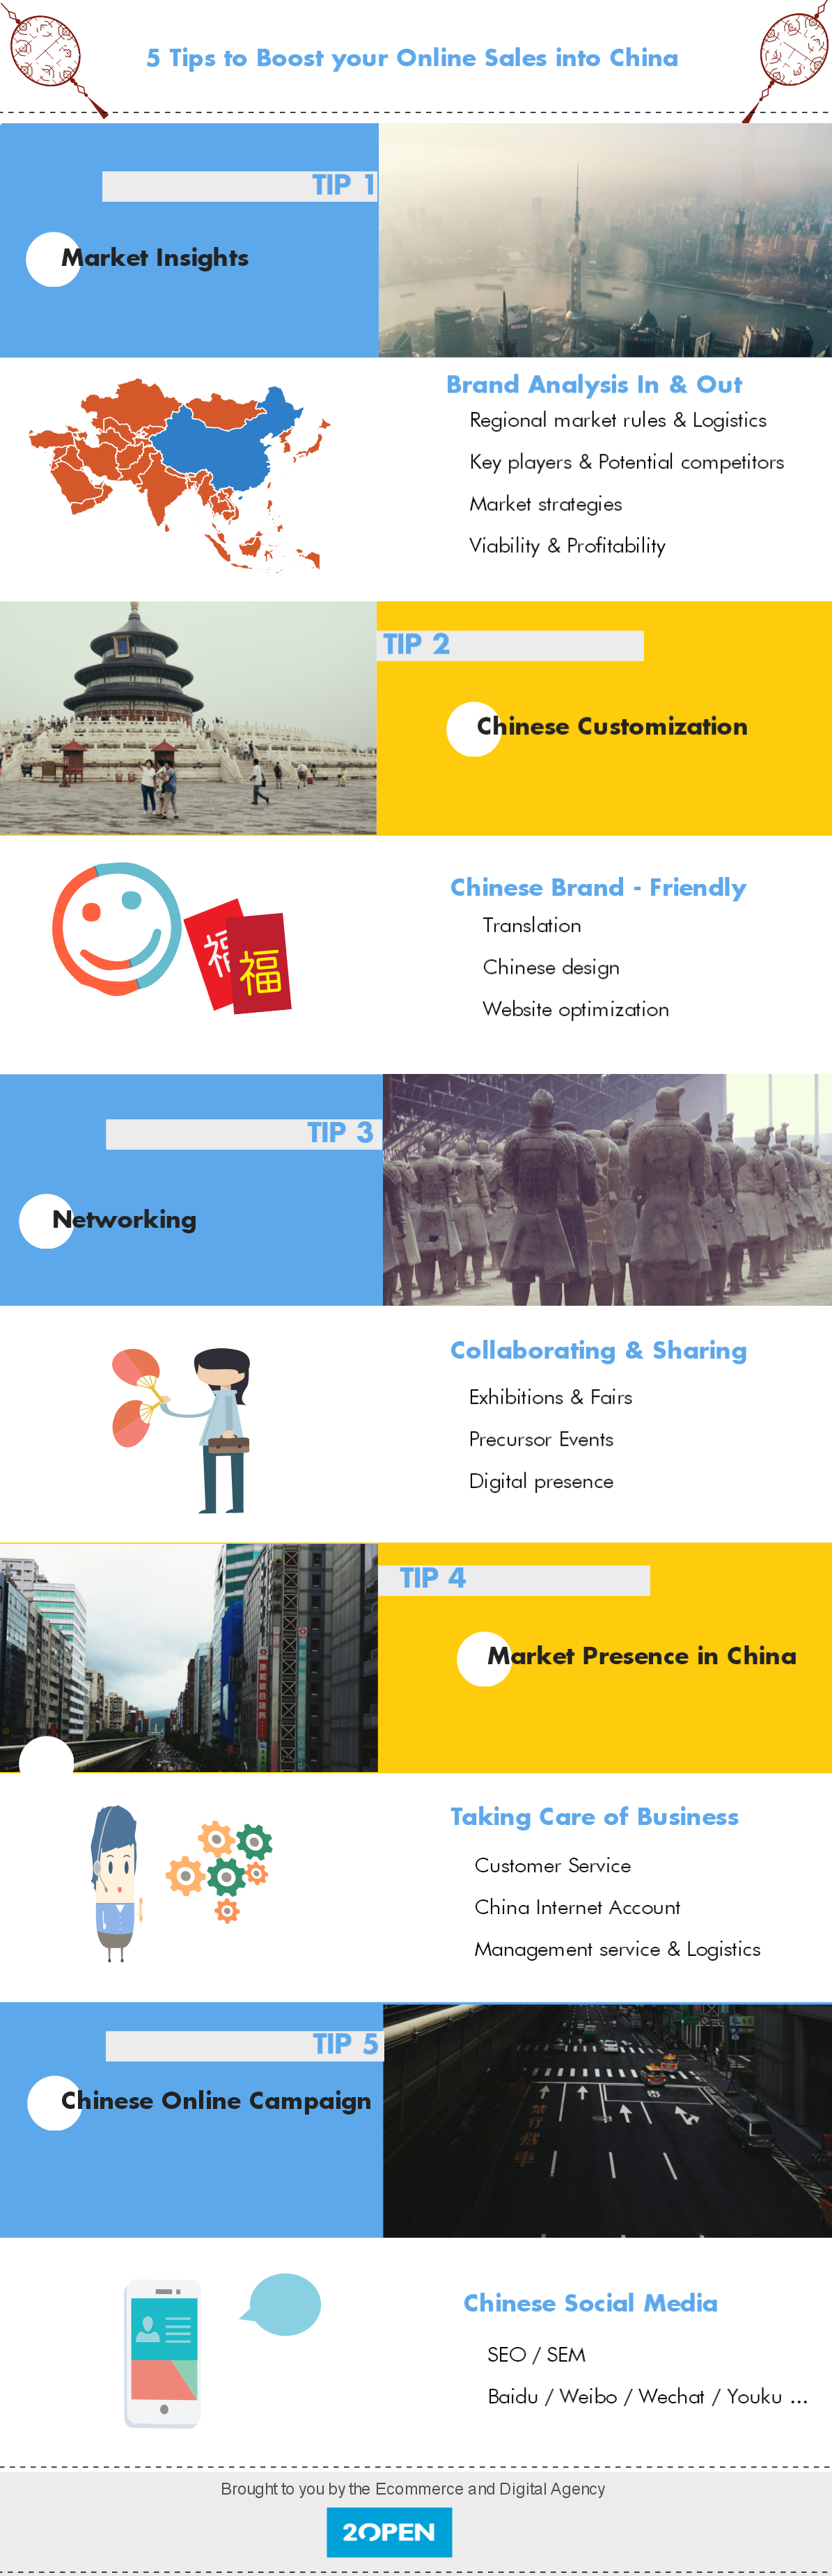 5 tips to boost your online sales into China